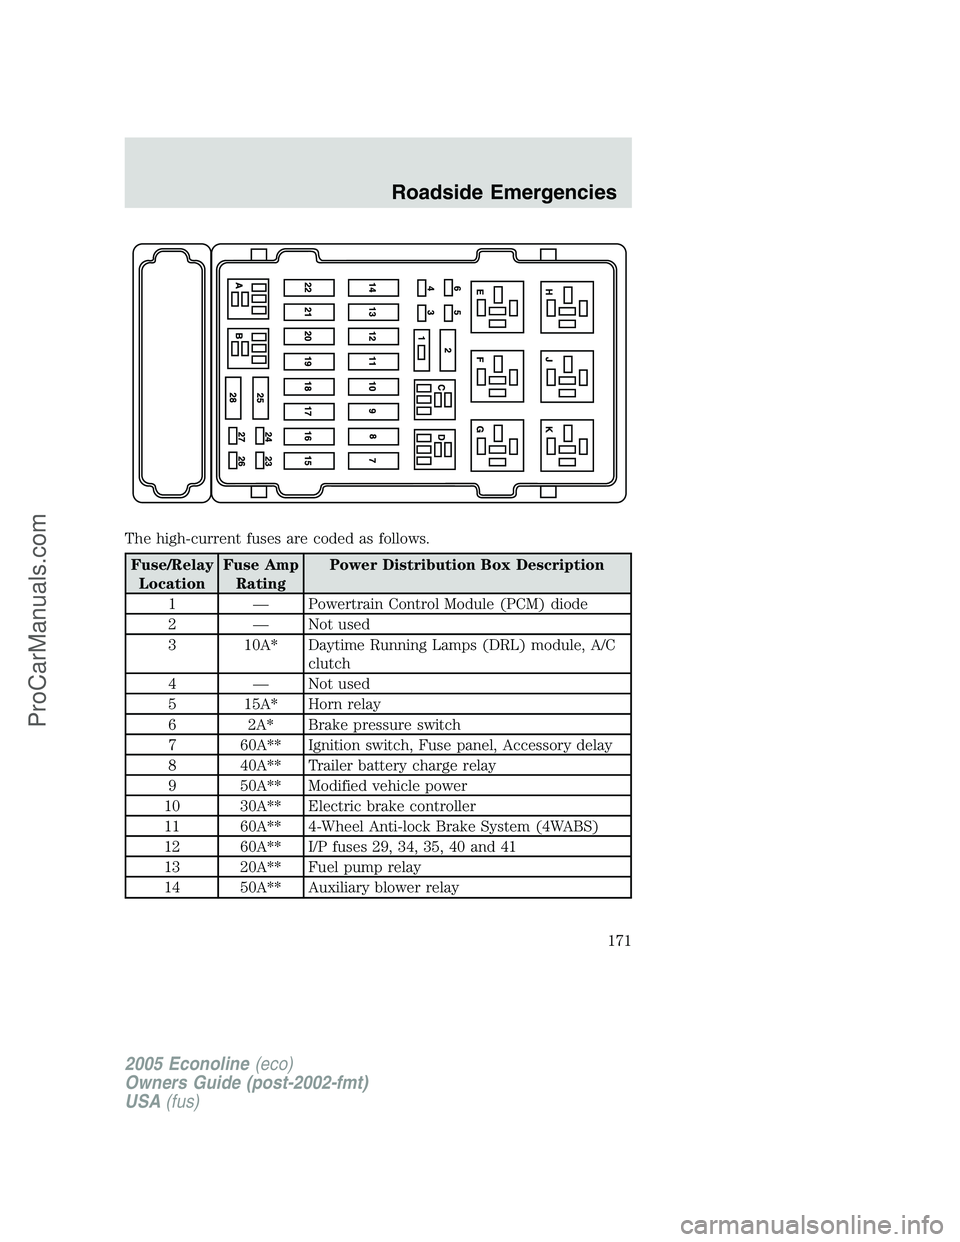 FORD E-350 2005  Owners Manual The high-current fuses are coded as follows.
Fuse/Relay
LocationFuse Amp
RatingPower Distribution Box Description
1 — Powertrain Control Module (PCM) diode
2 — Not used
3 10A* Daytime Running Lamp